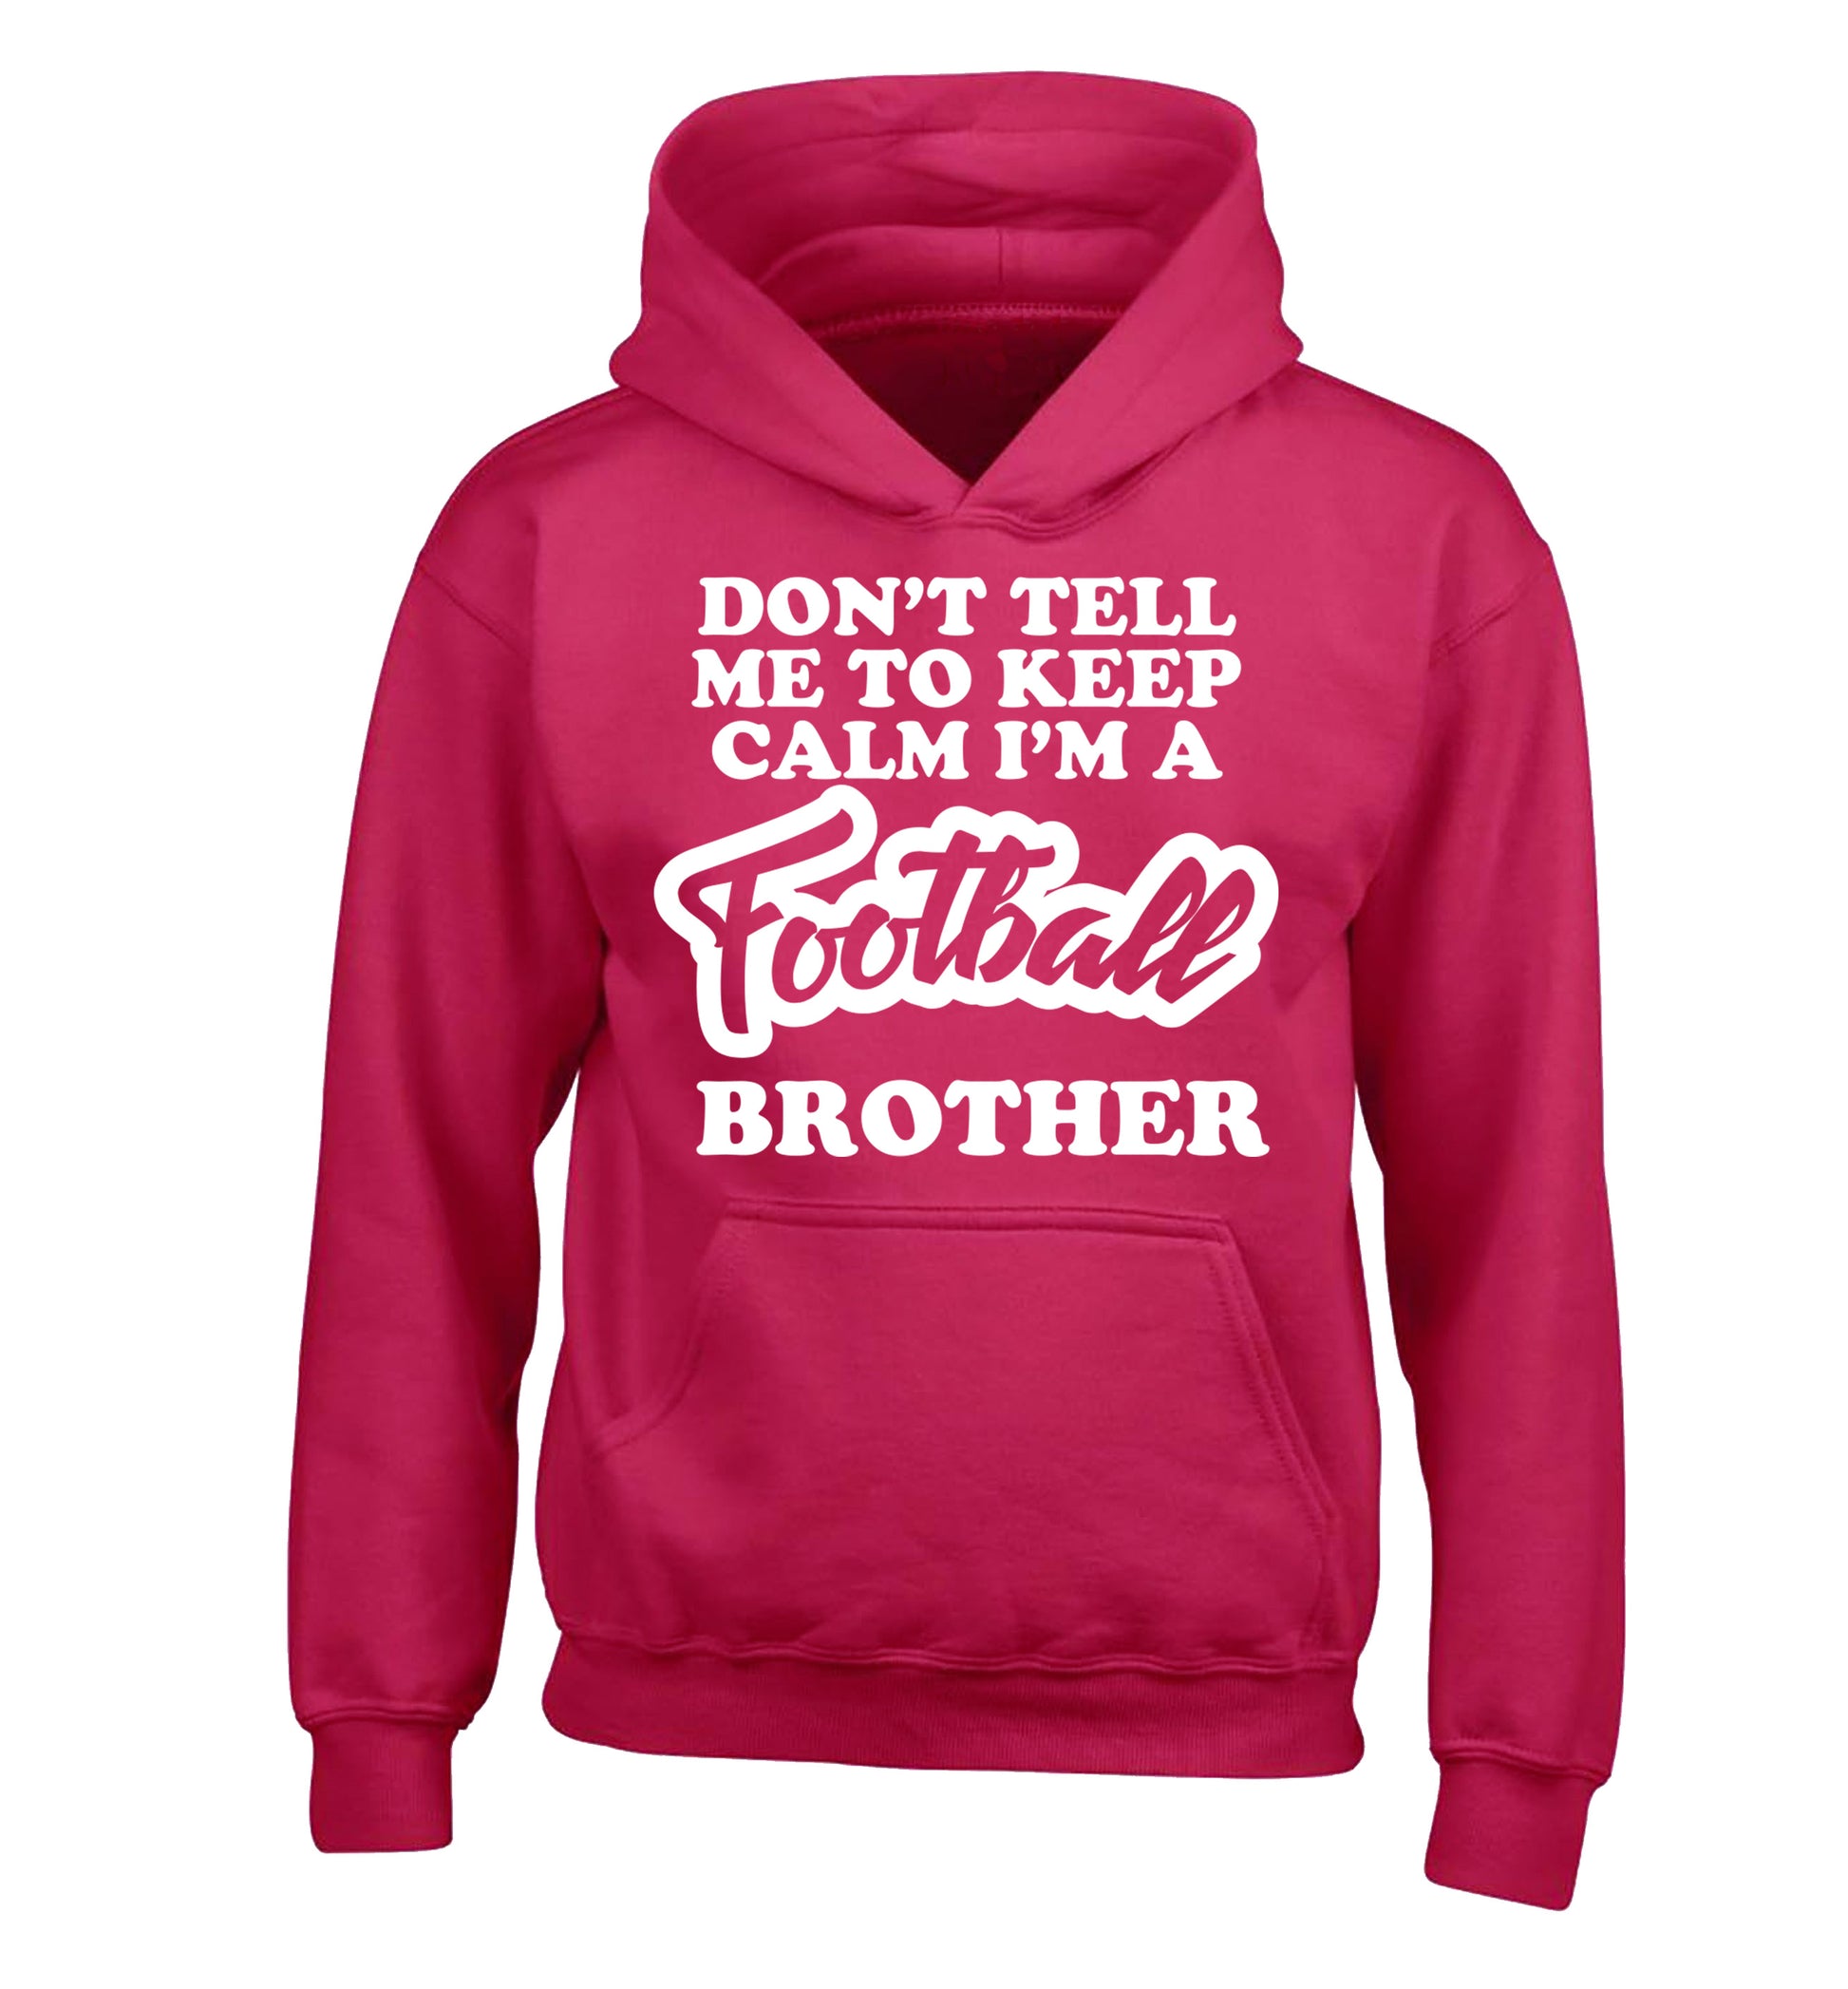 Don't tell me to keep calm I'm a football brother children's pink hoodie 12-14 Years